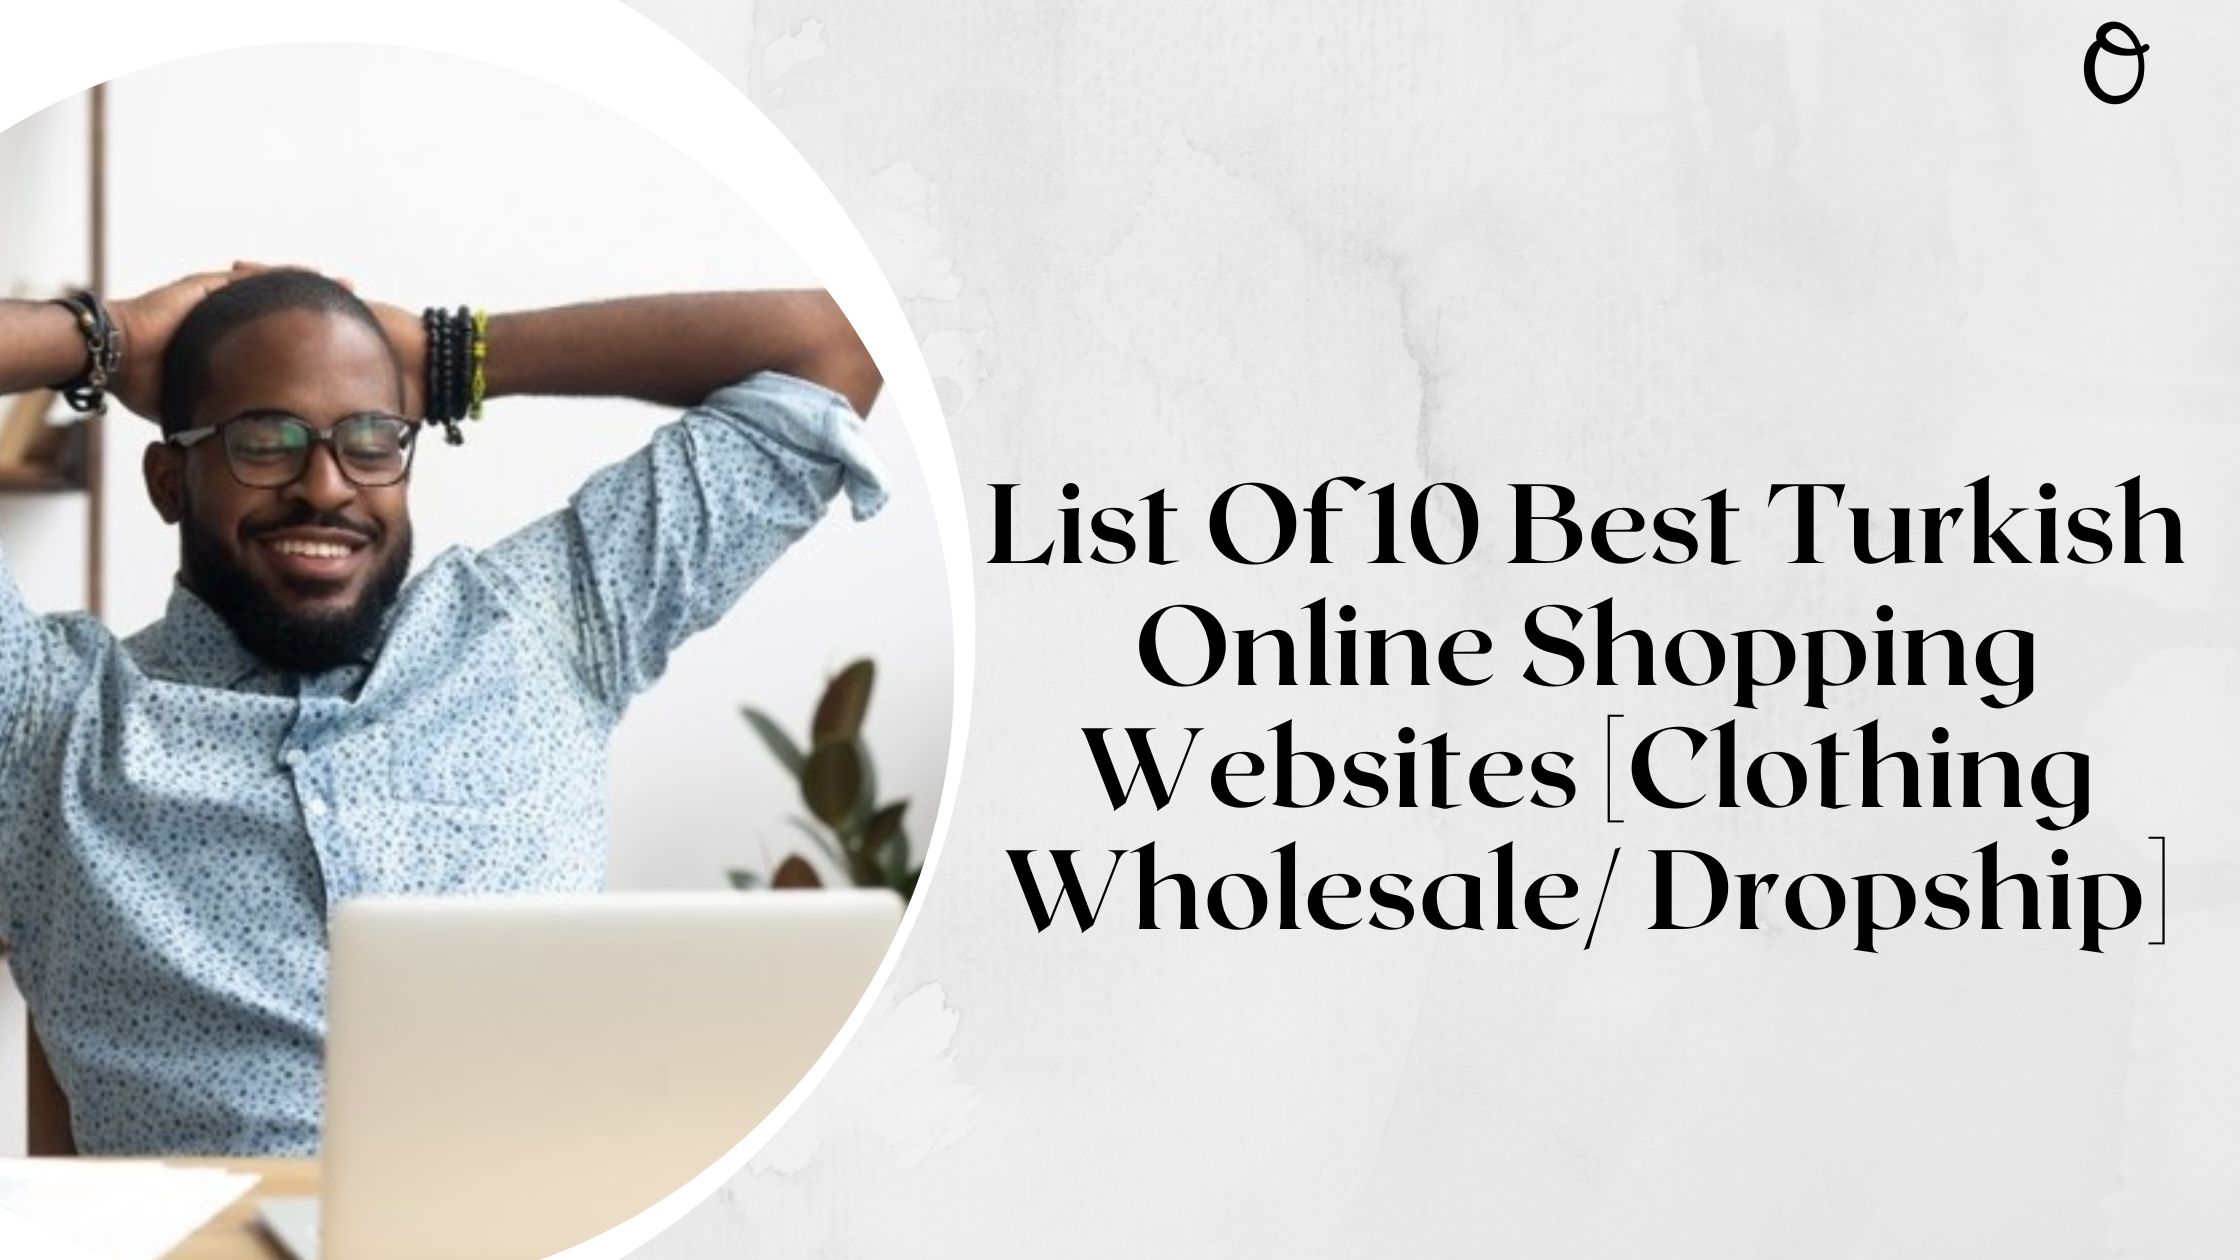 List Of 10 Best Turkish Online Shopping Websites [Clothing Wholesale/ Dropship]